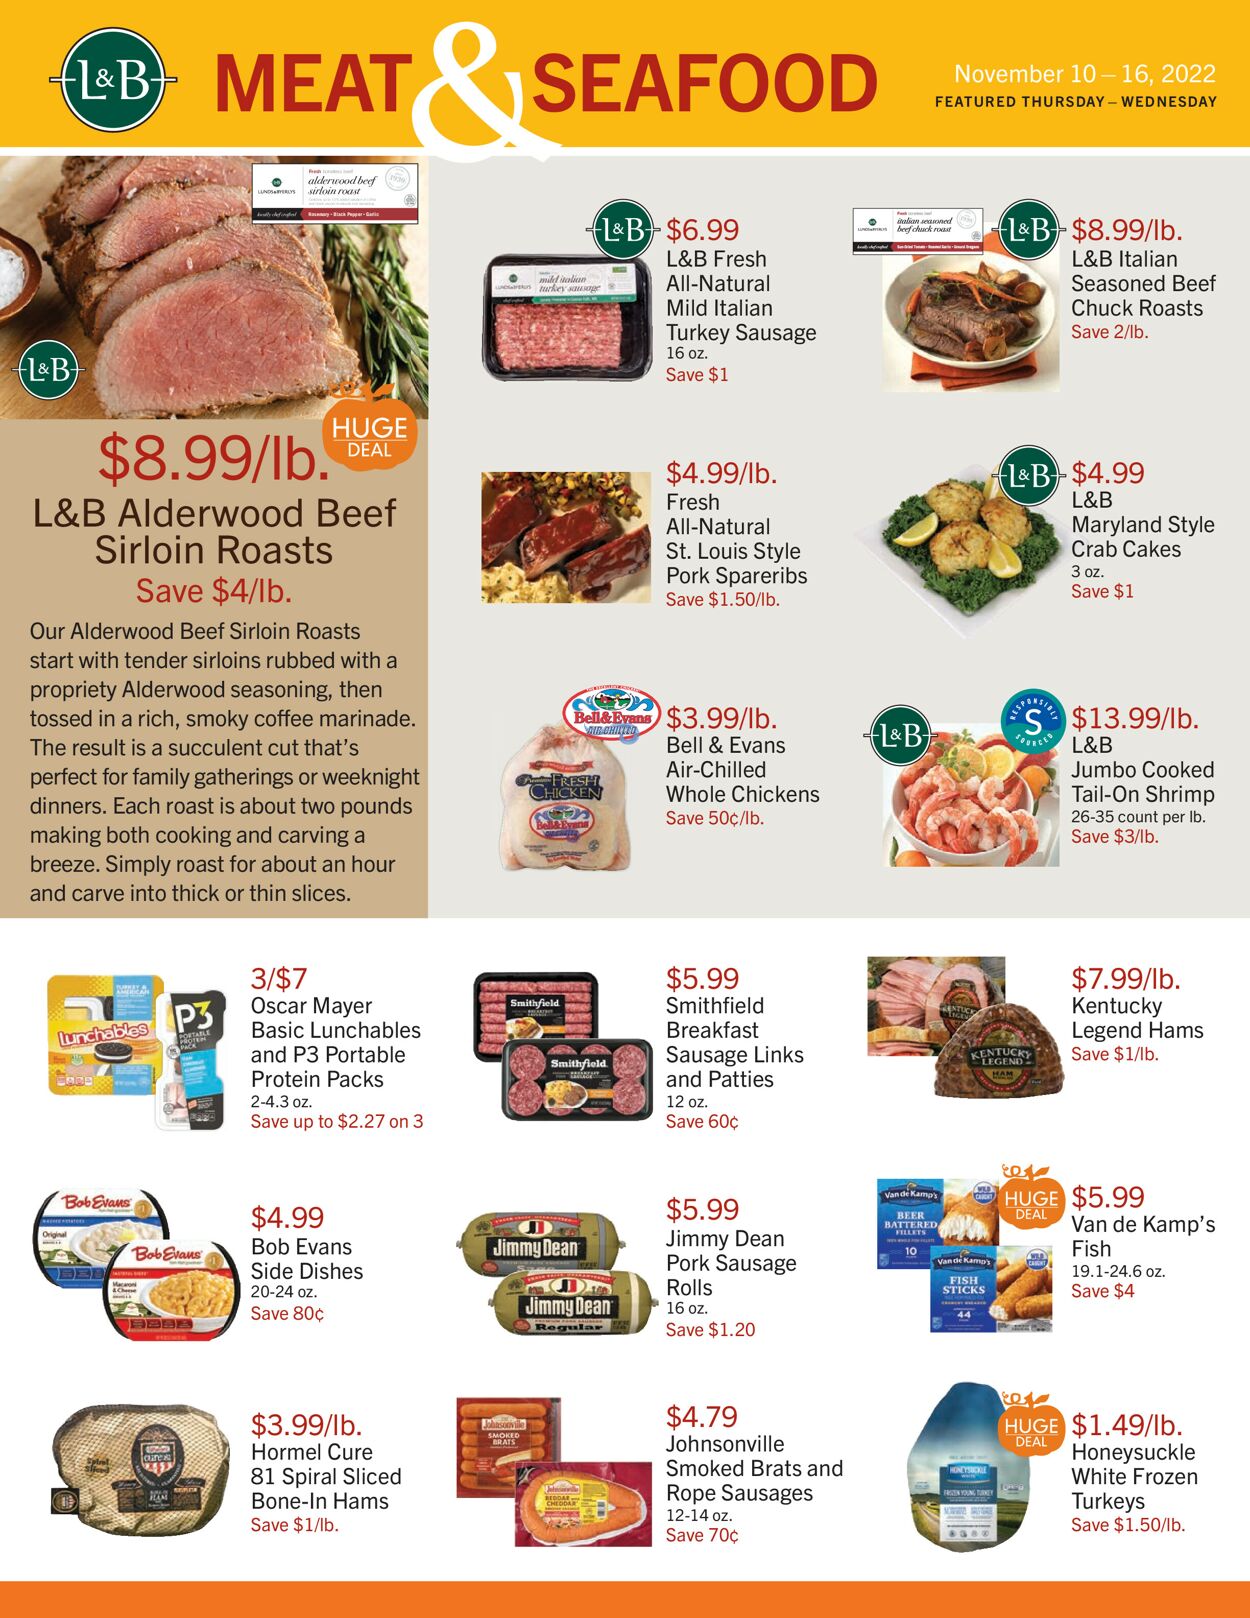 Lunds & Byerlys Ad from 11/10/2022